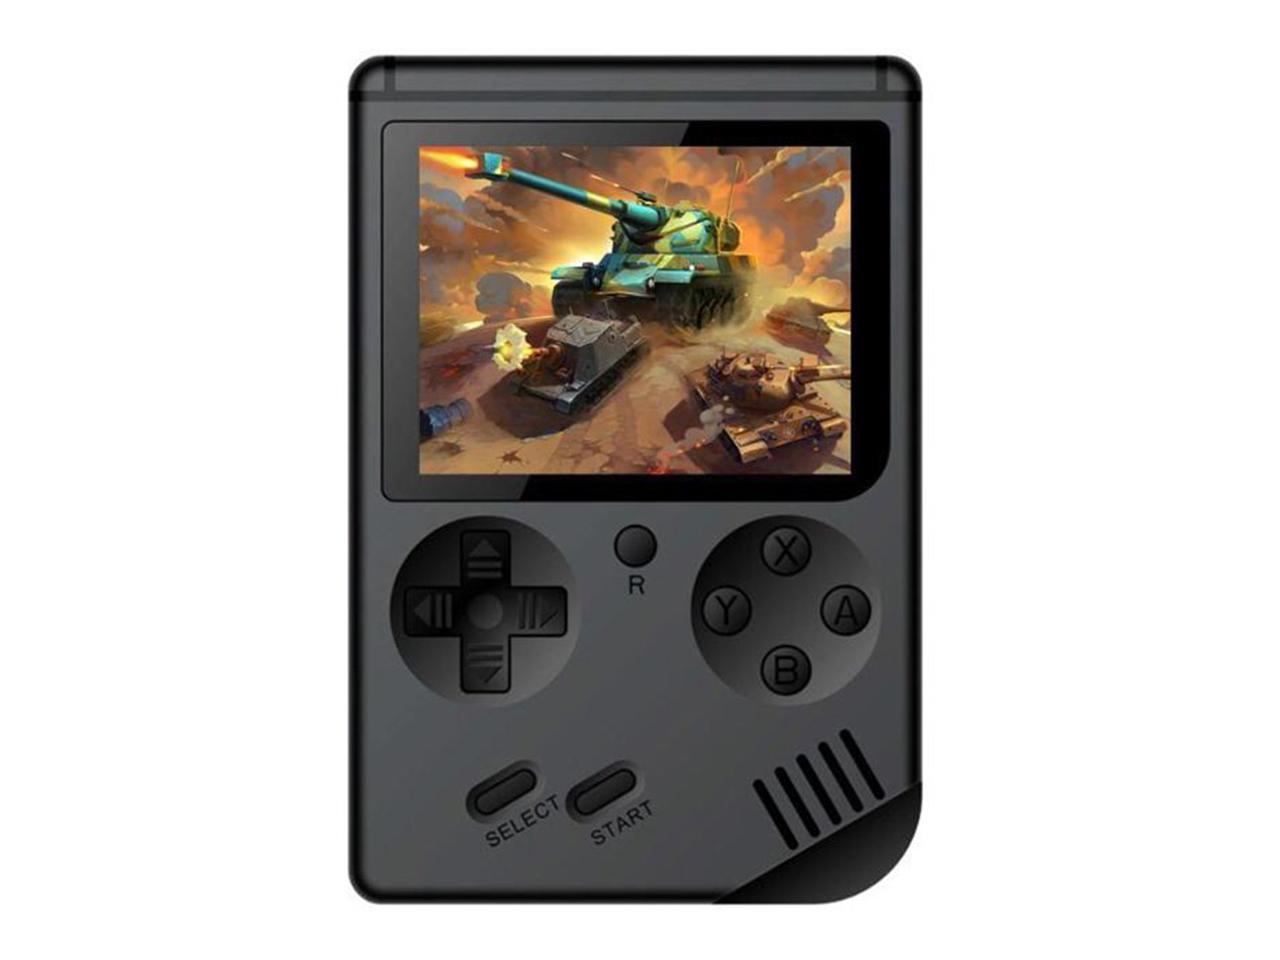 handheld games console with built in games